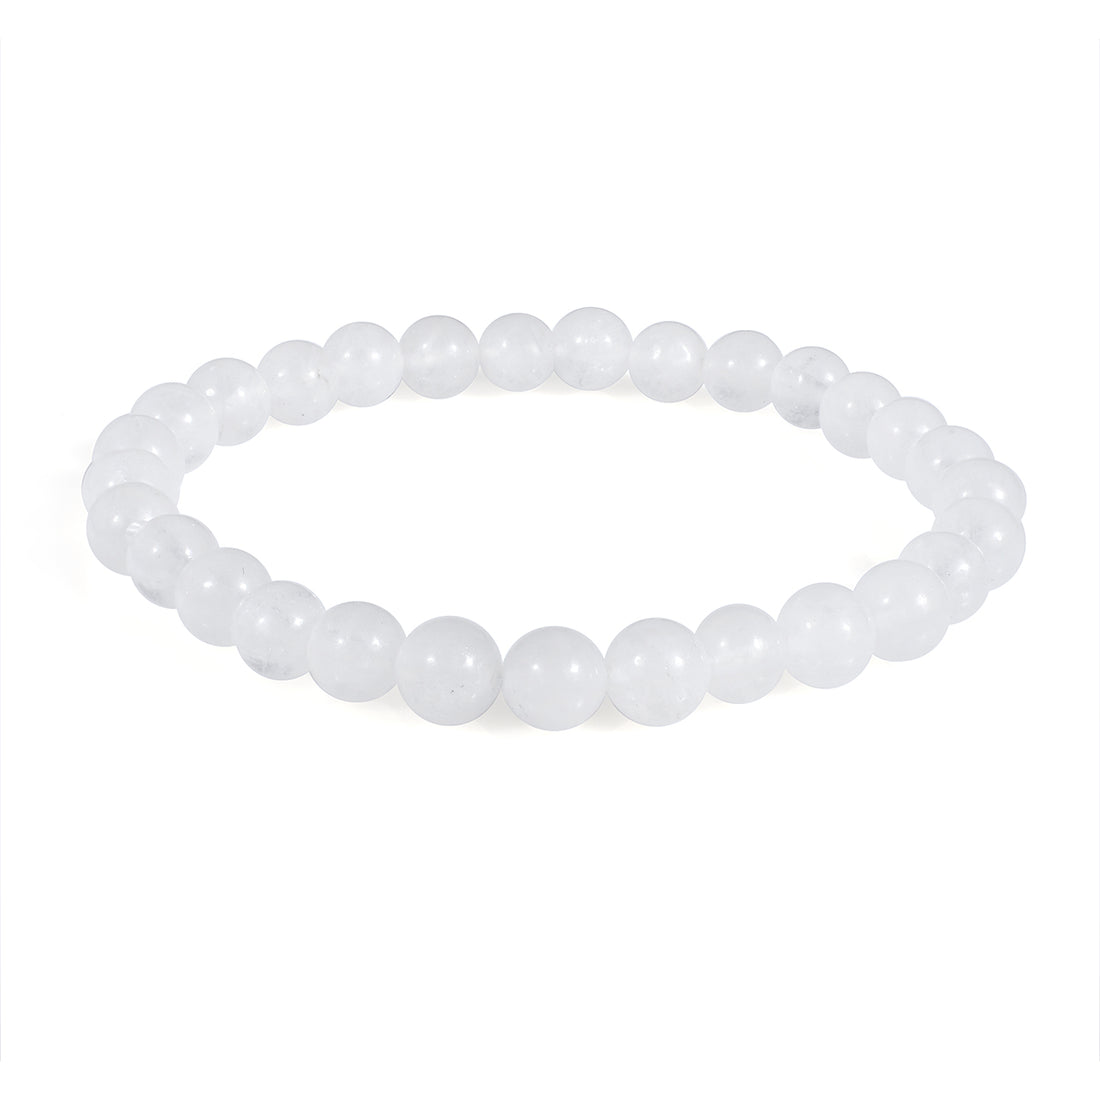 Elegant Selenite Stretch Bracelet adorned with 6mm smooth round white beads, a stylish accessory for mental clarity and spiritual purity